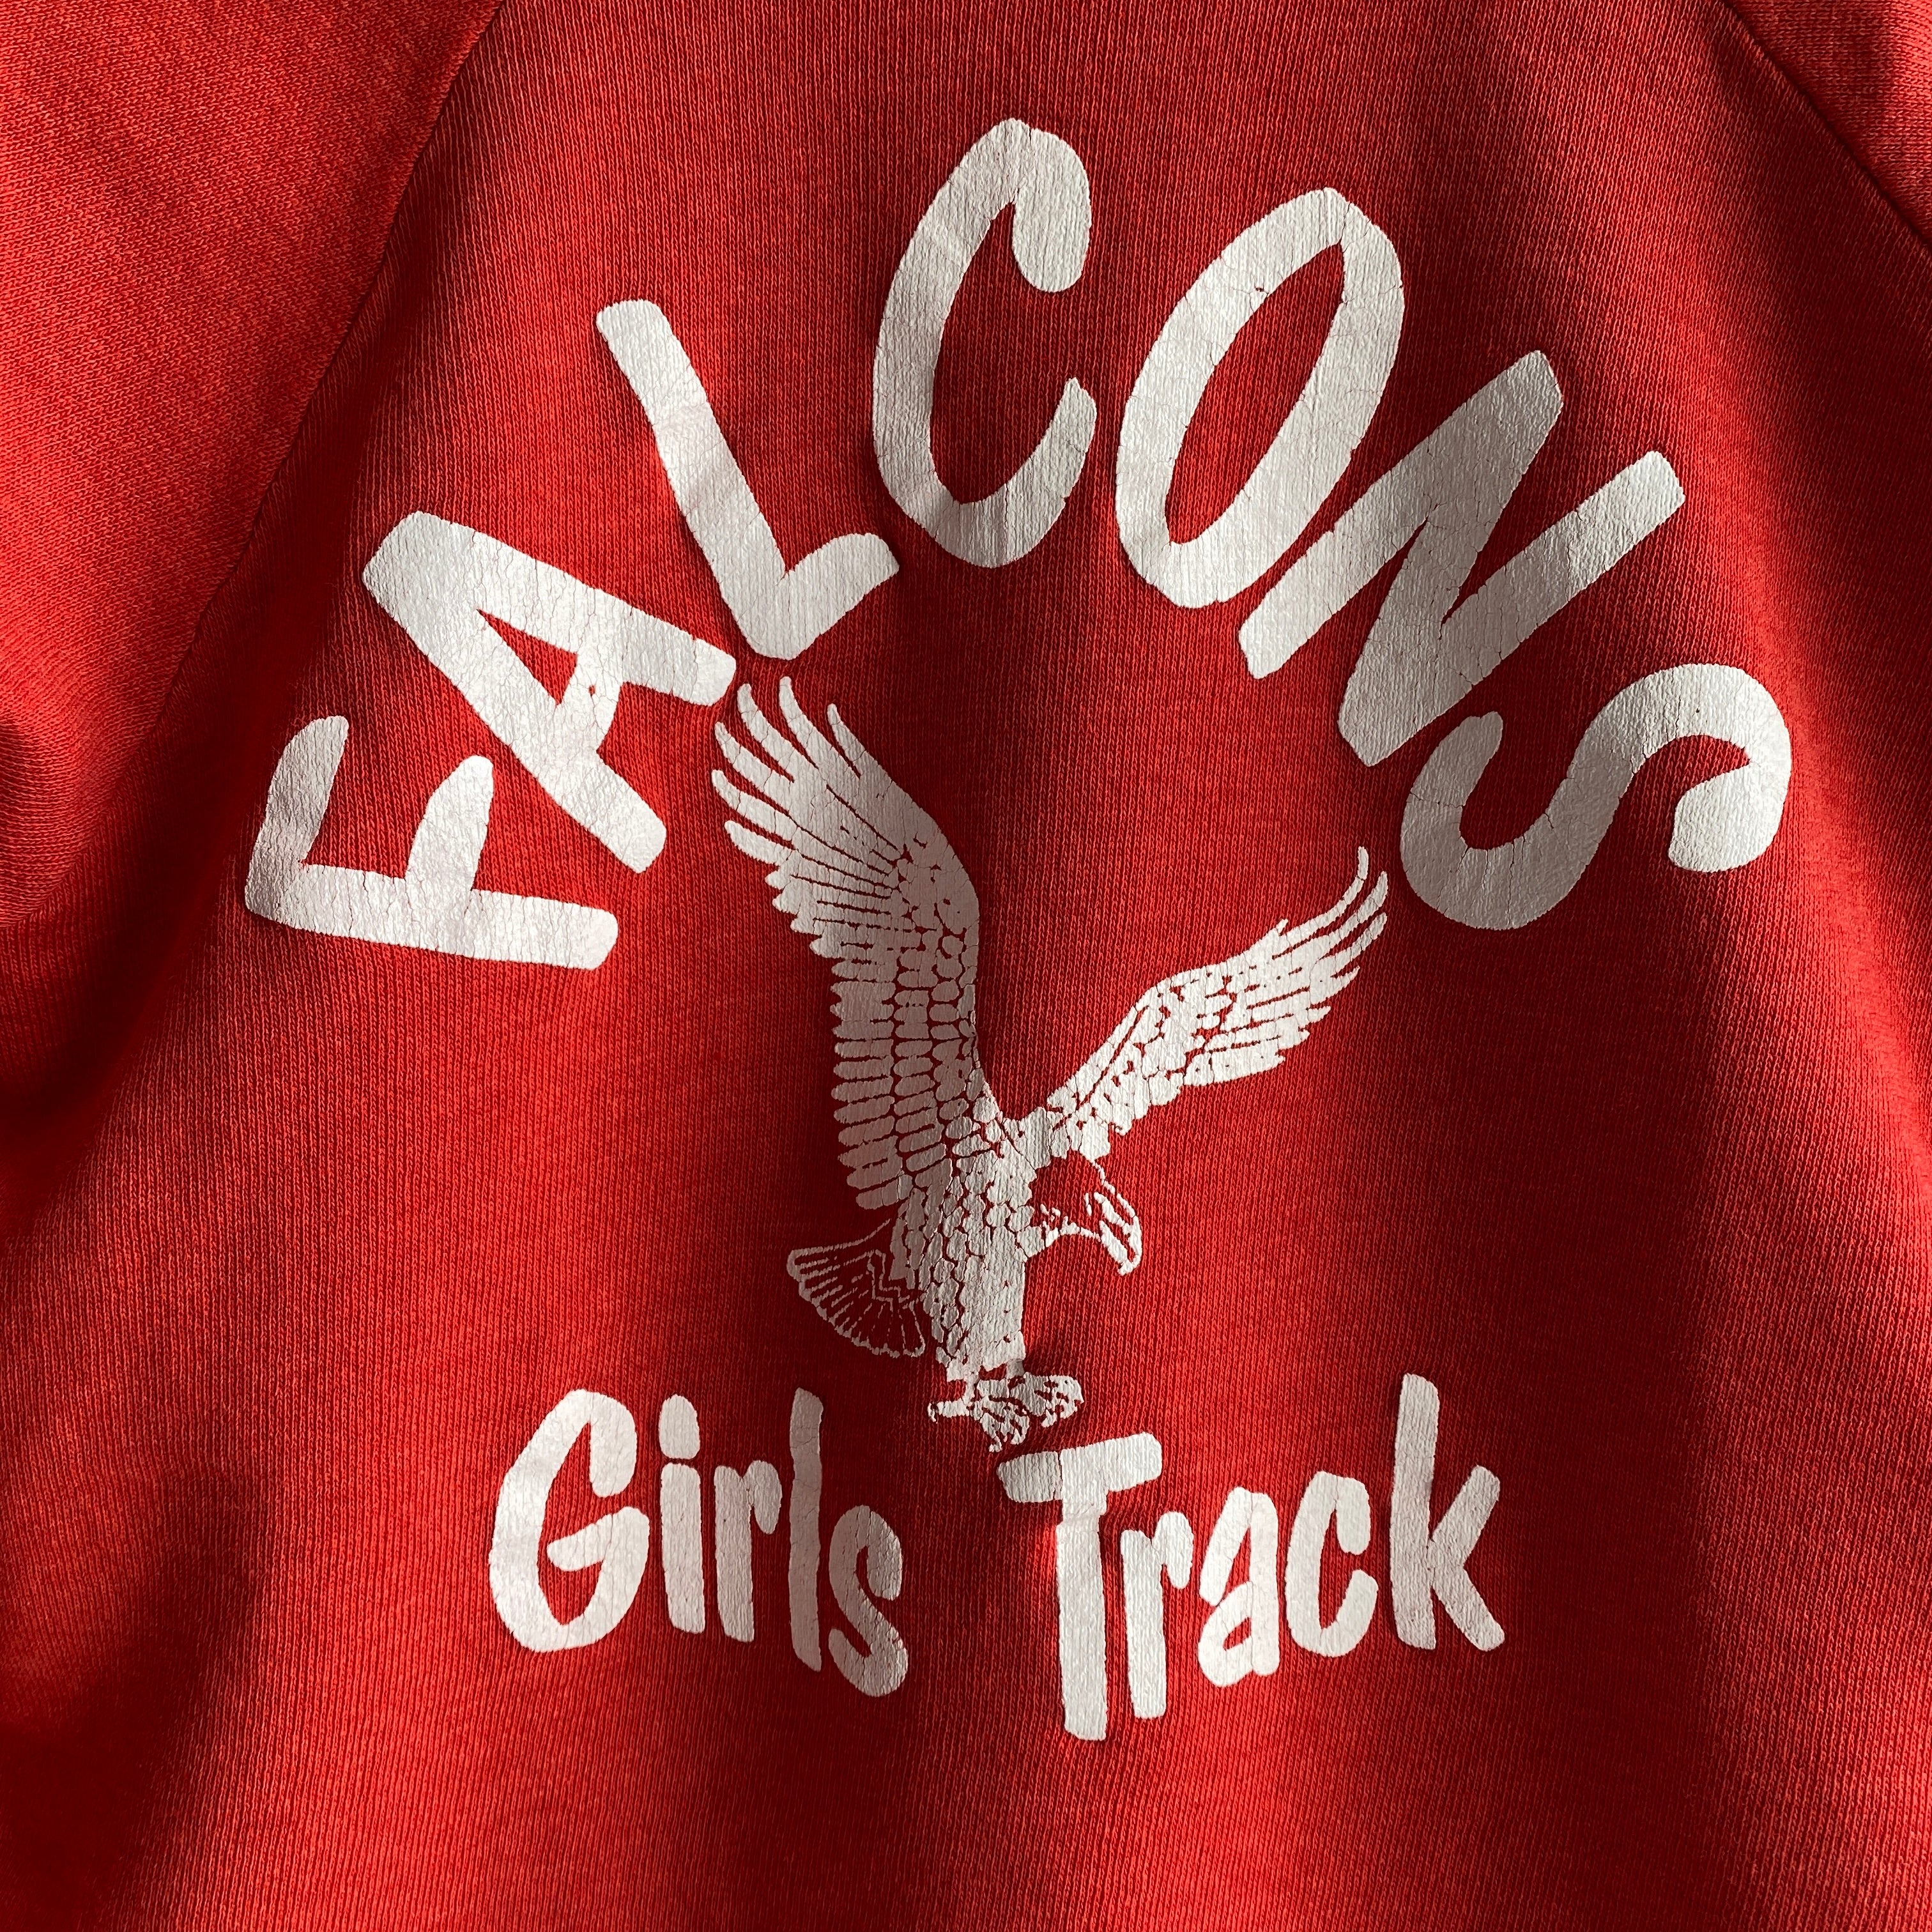 1960/70s Falcons Girls Track by College House - YES!